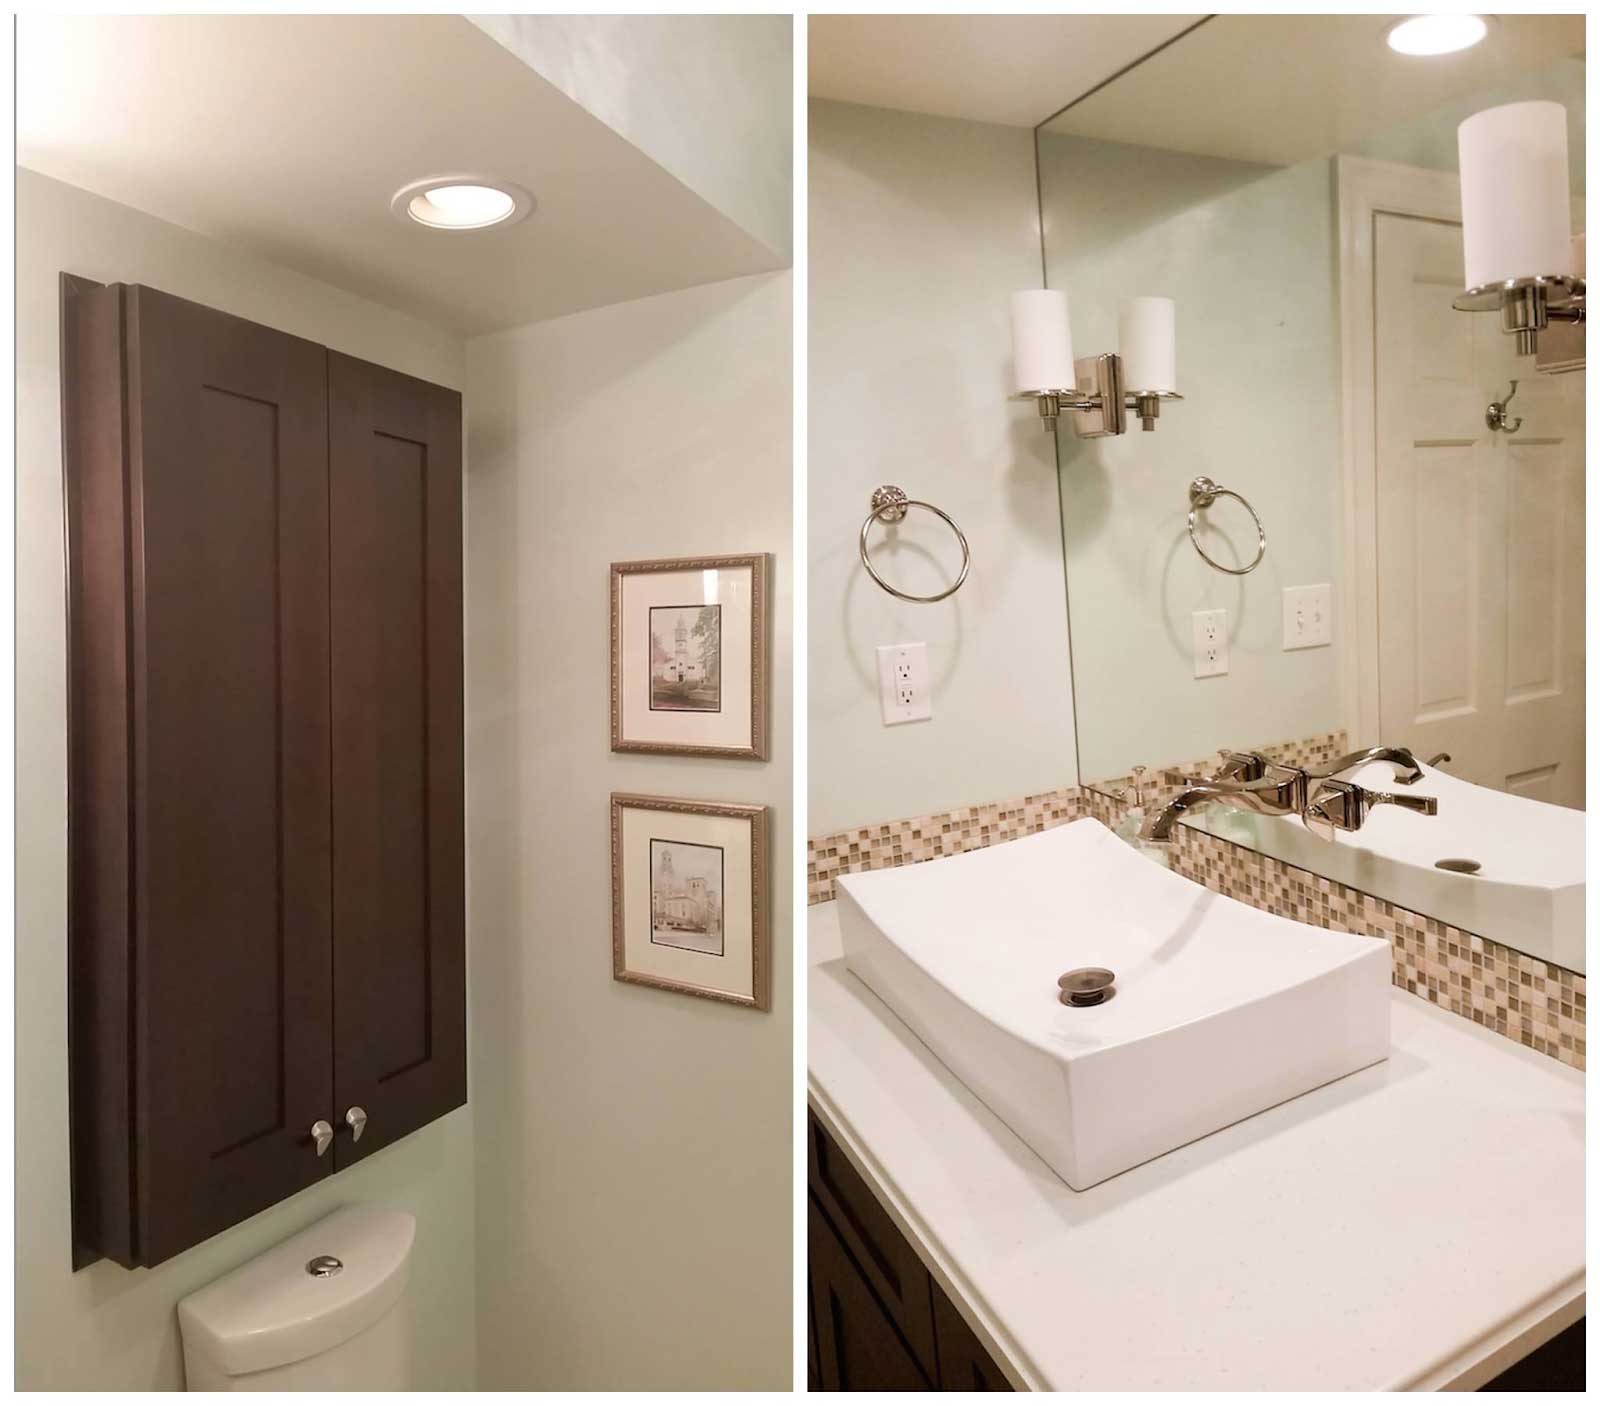 Built in cabinet over the toilet. Vessel sink on vanity with storage, mosaic tile backsplash, and mirror-mounted sconces. 